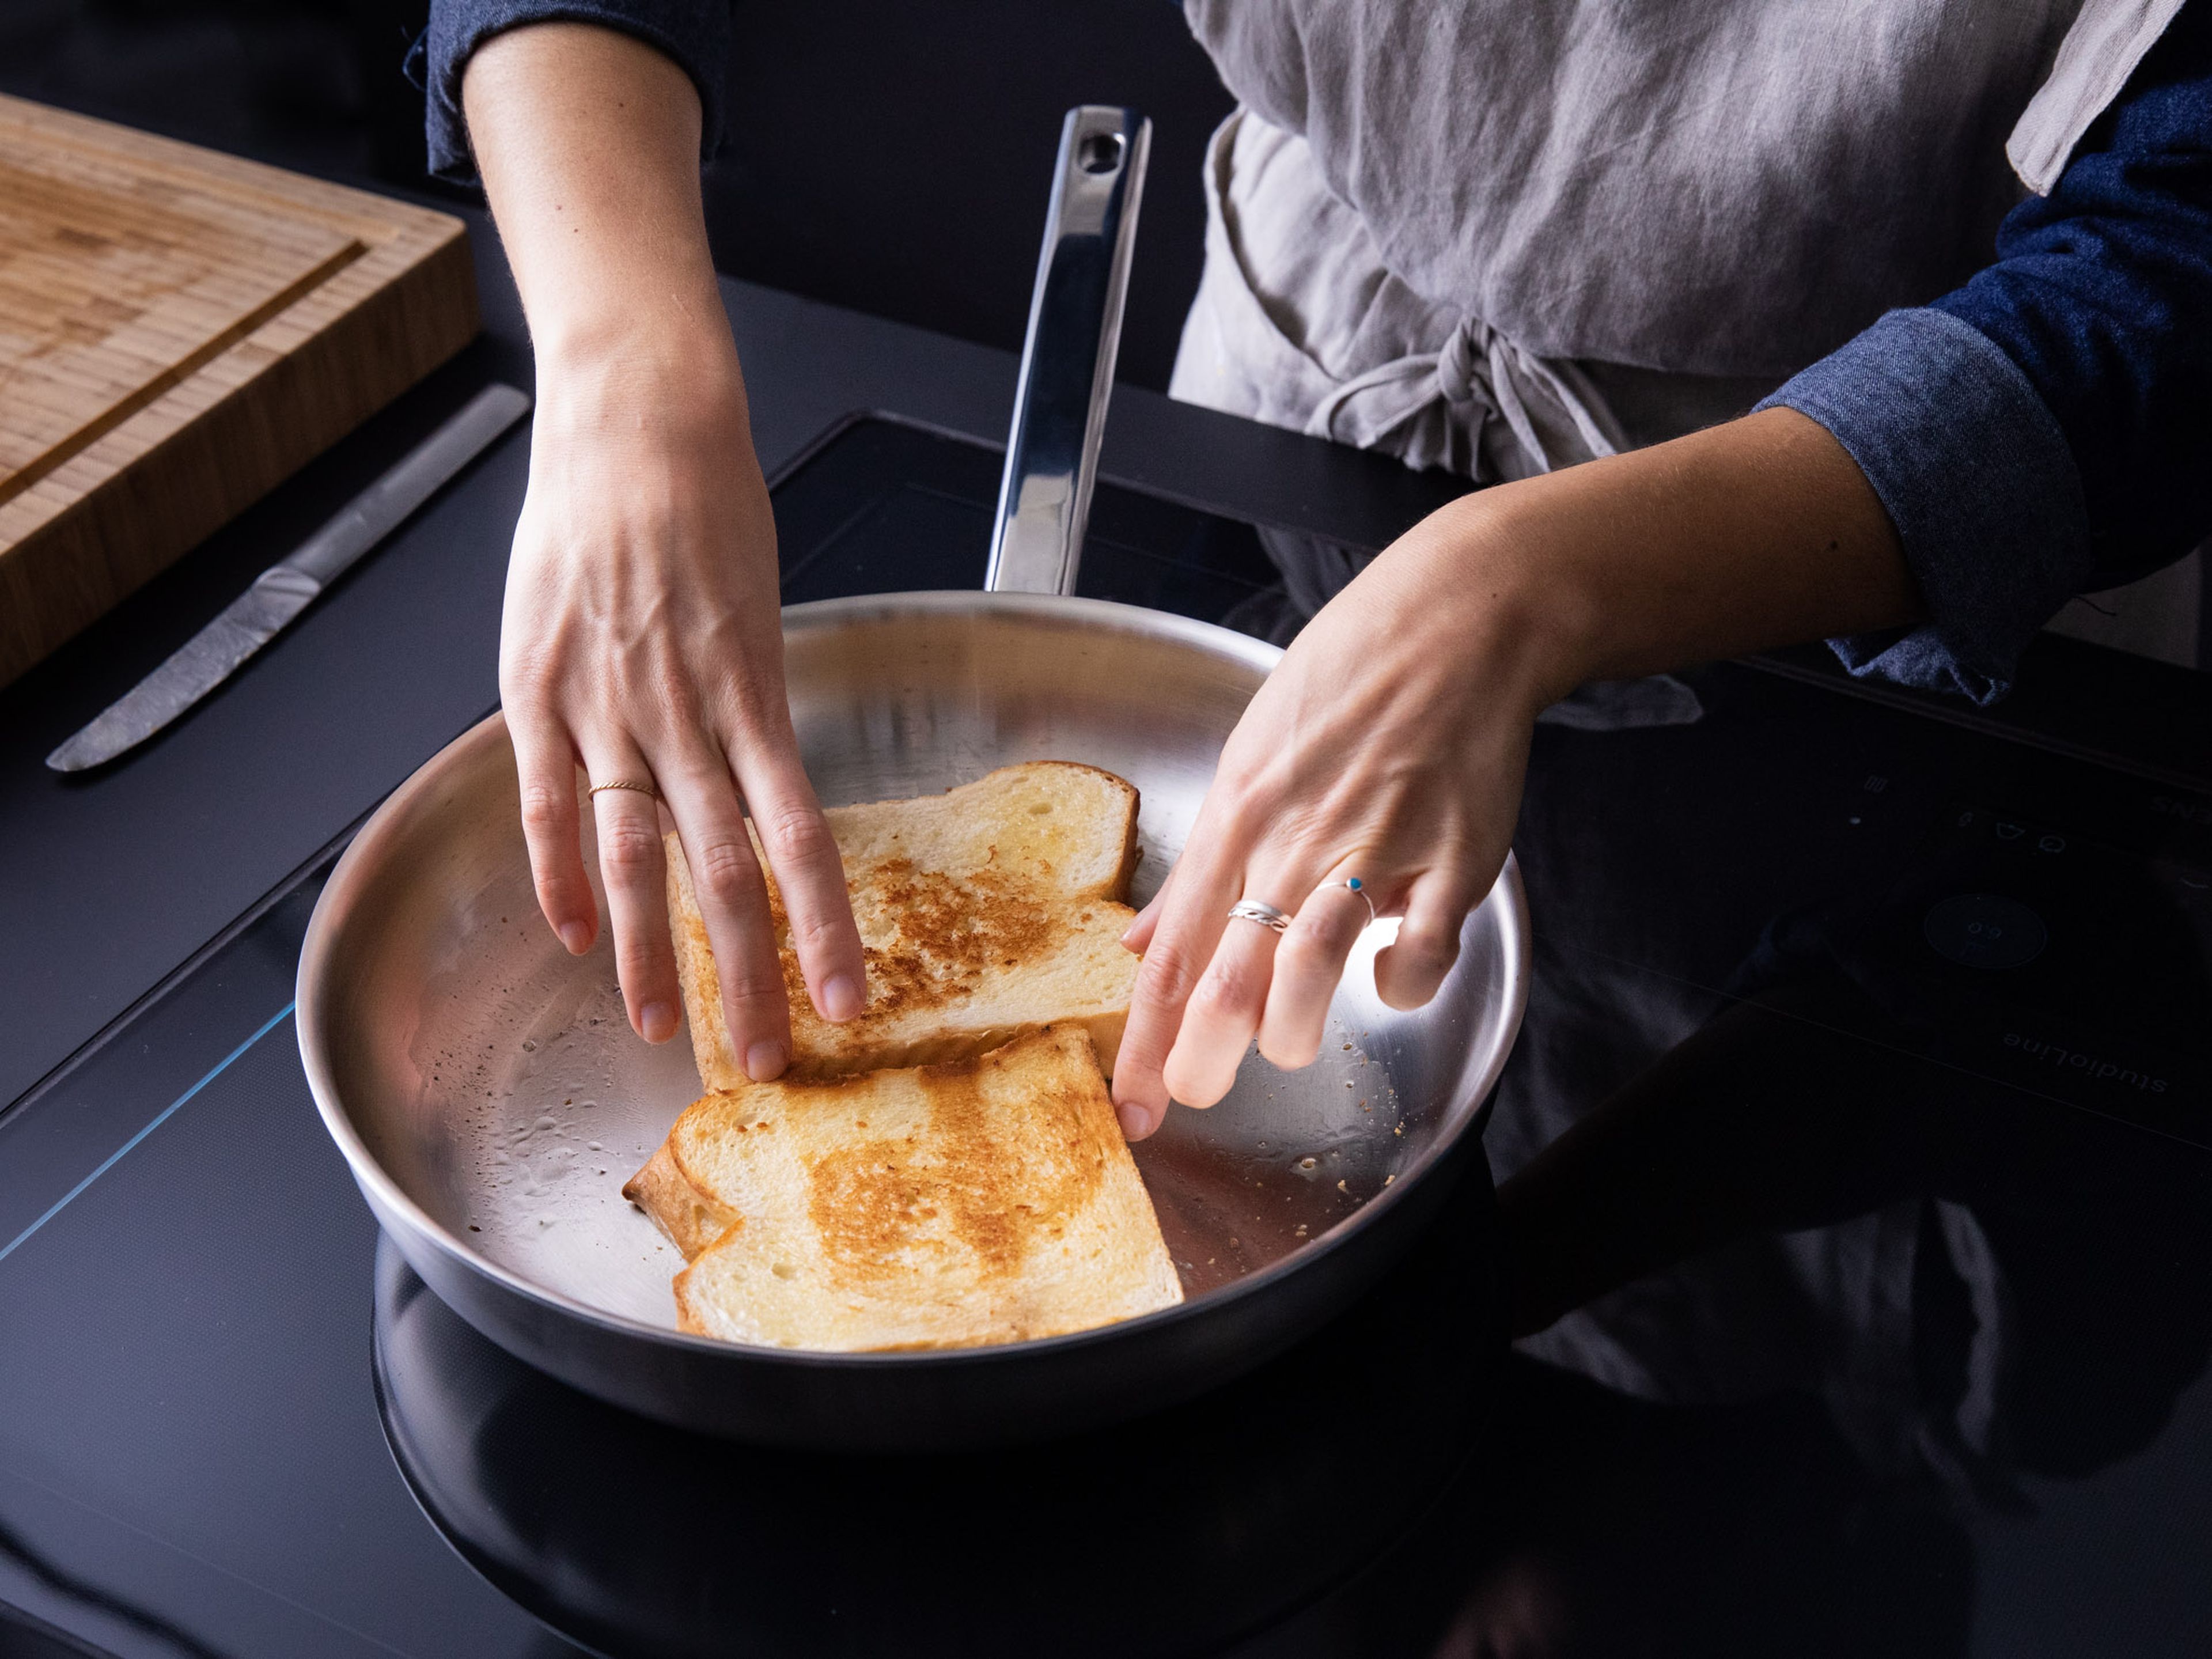 Spread butter on each side of the bread slices. In the same frying pan, toast the bread on each side until golden brown. Cut tomato into thick slices and season with sea salt and pepper.